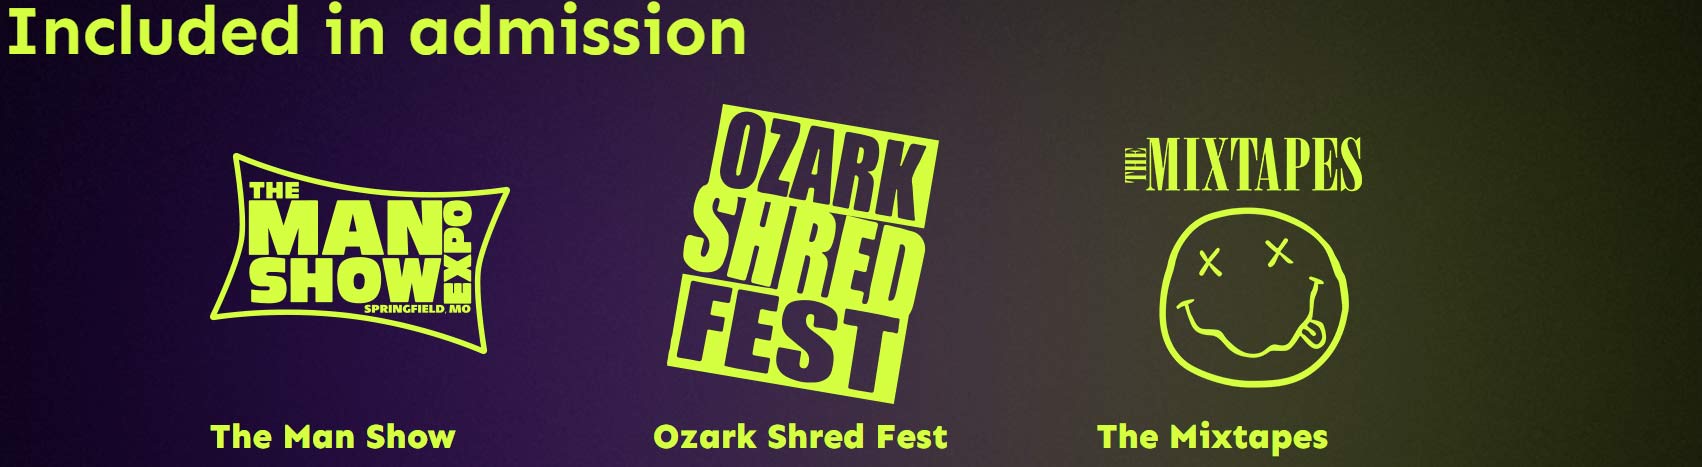 Included in admission - Man Show Entry, Ozark Shred Fest, and The Mixtapes!